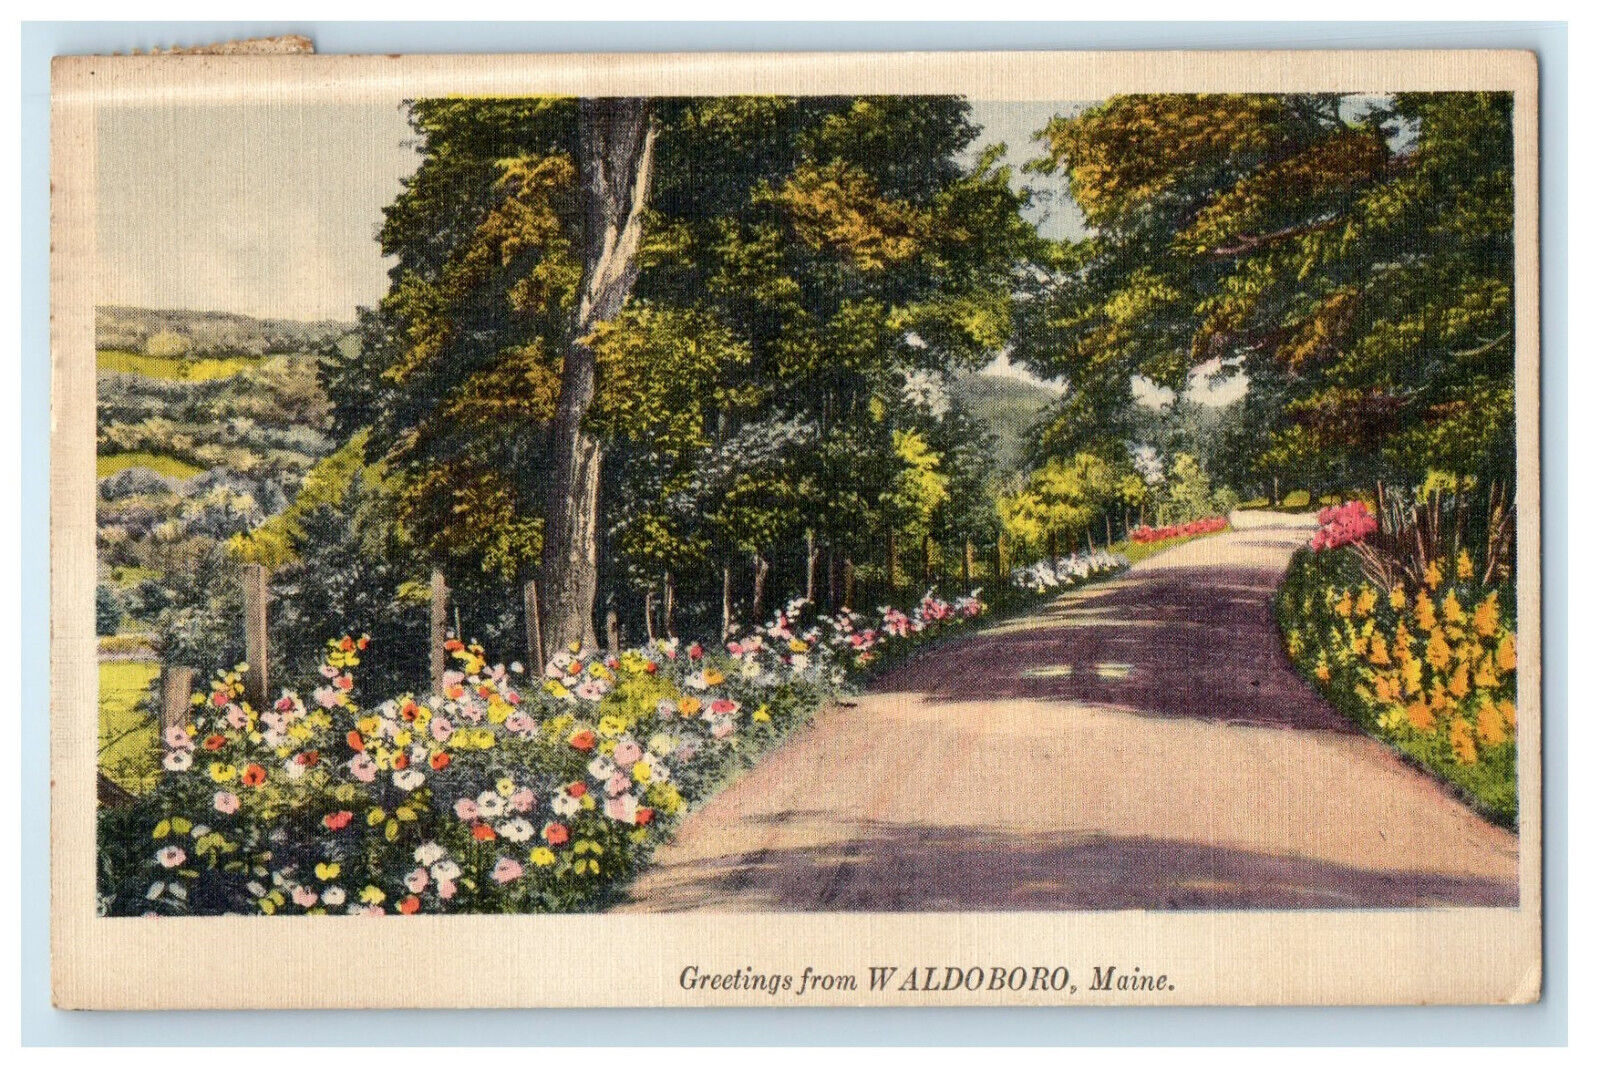 c1930s Road Scene Greetings from Waldoboro Maine ME Posted Vintage Postcard